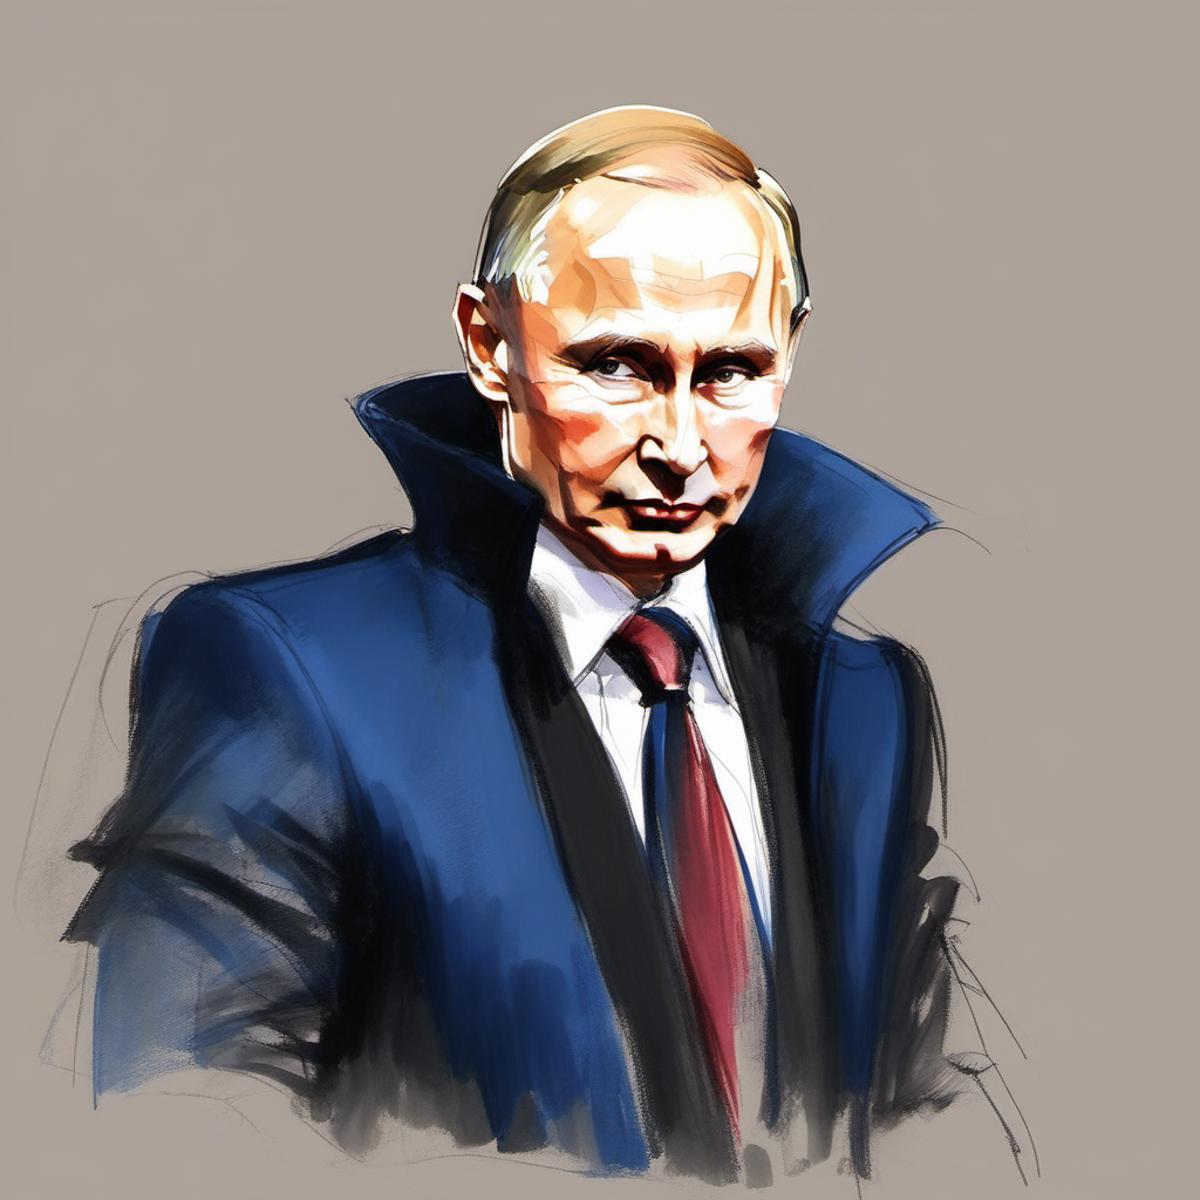 Courtroom Sketch Style image by Andron82